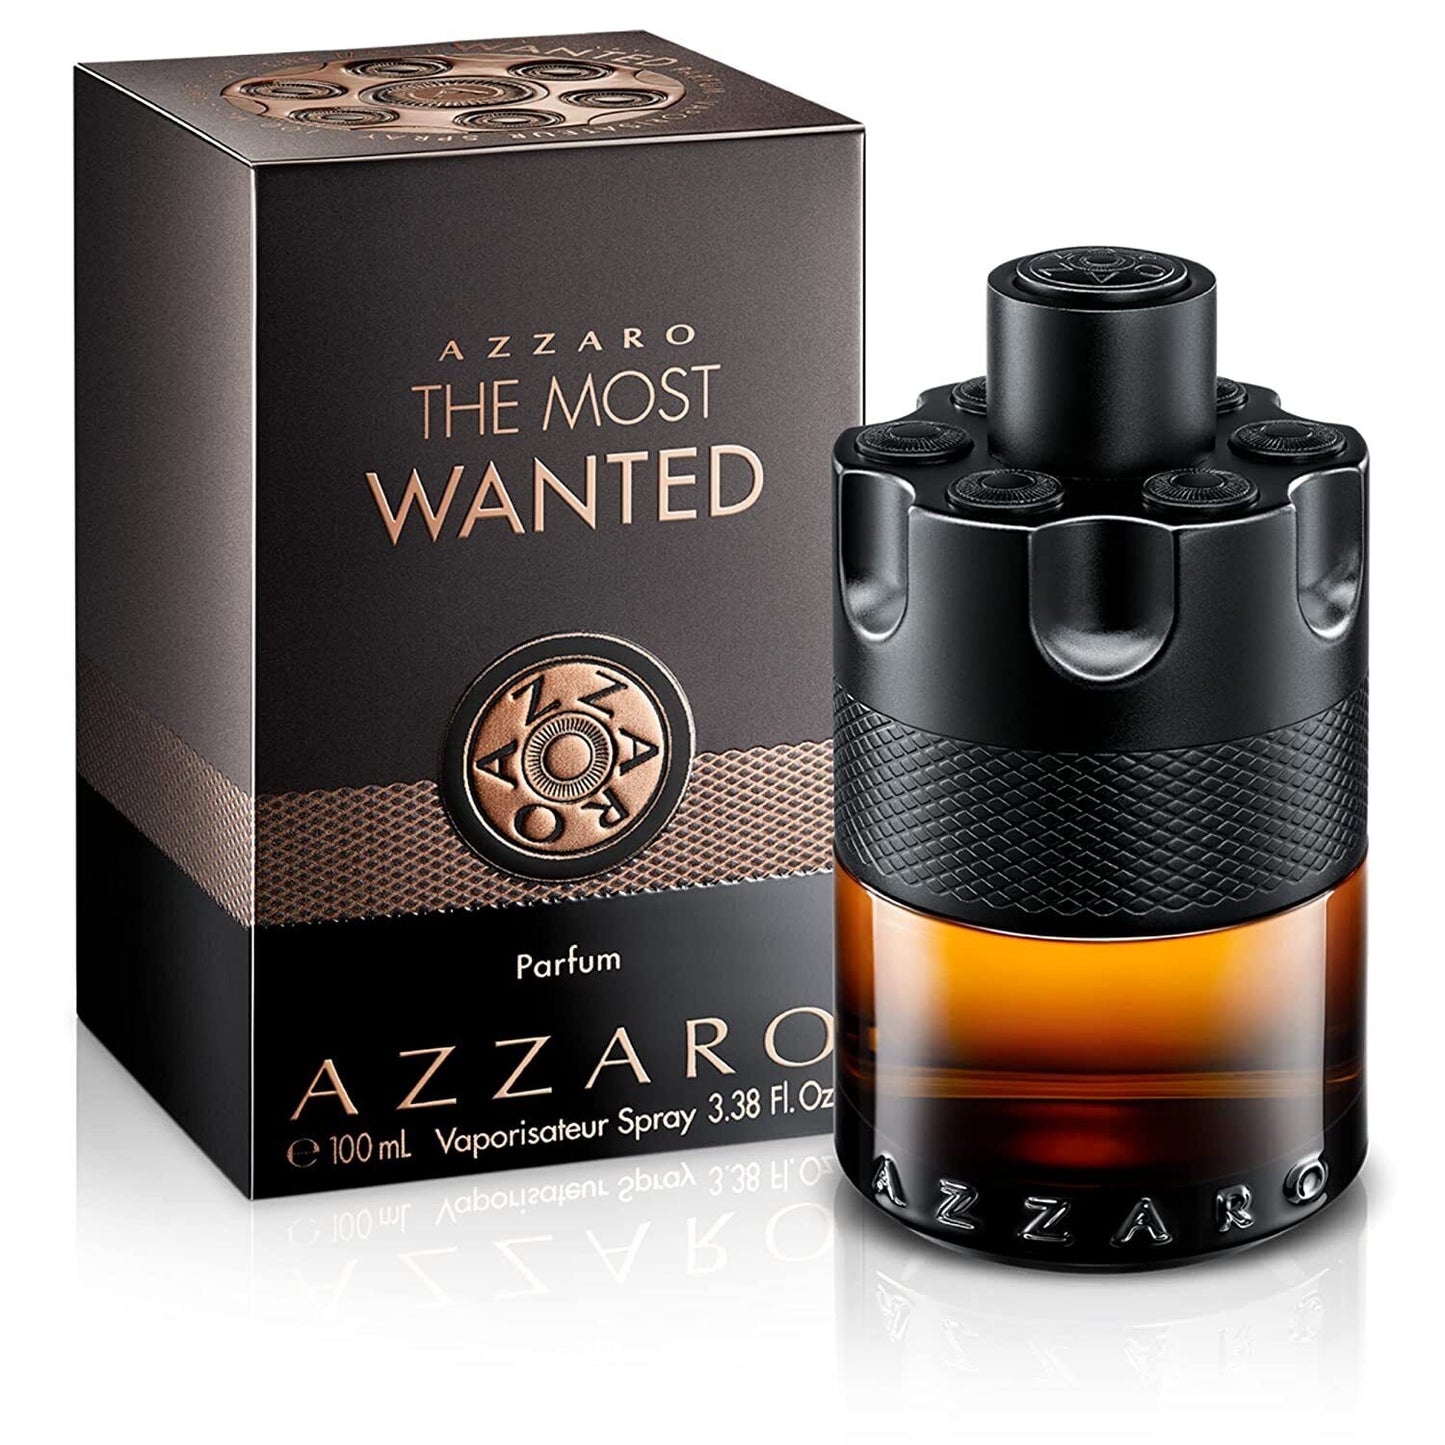 Azzaro The Most Wanted 100ml Parfum